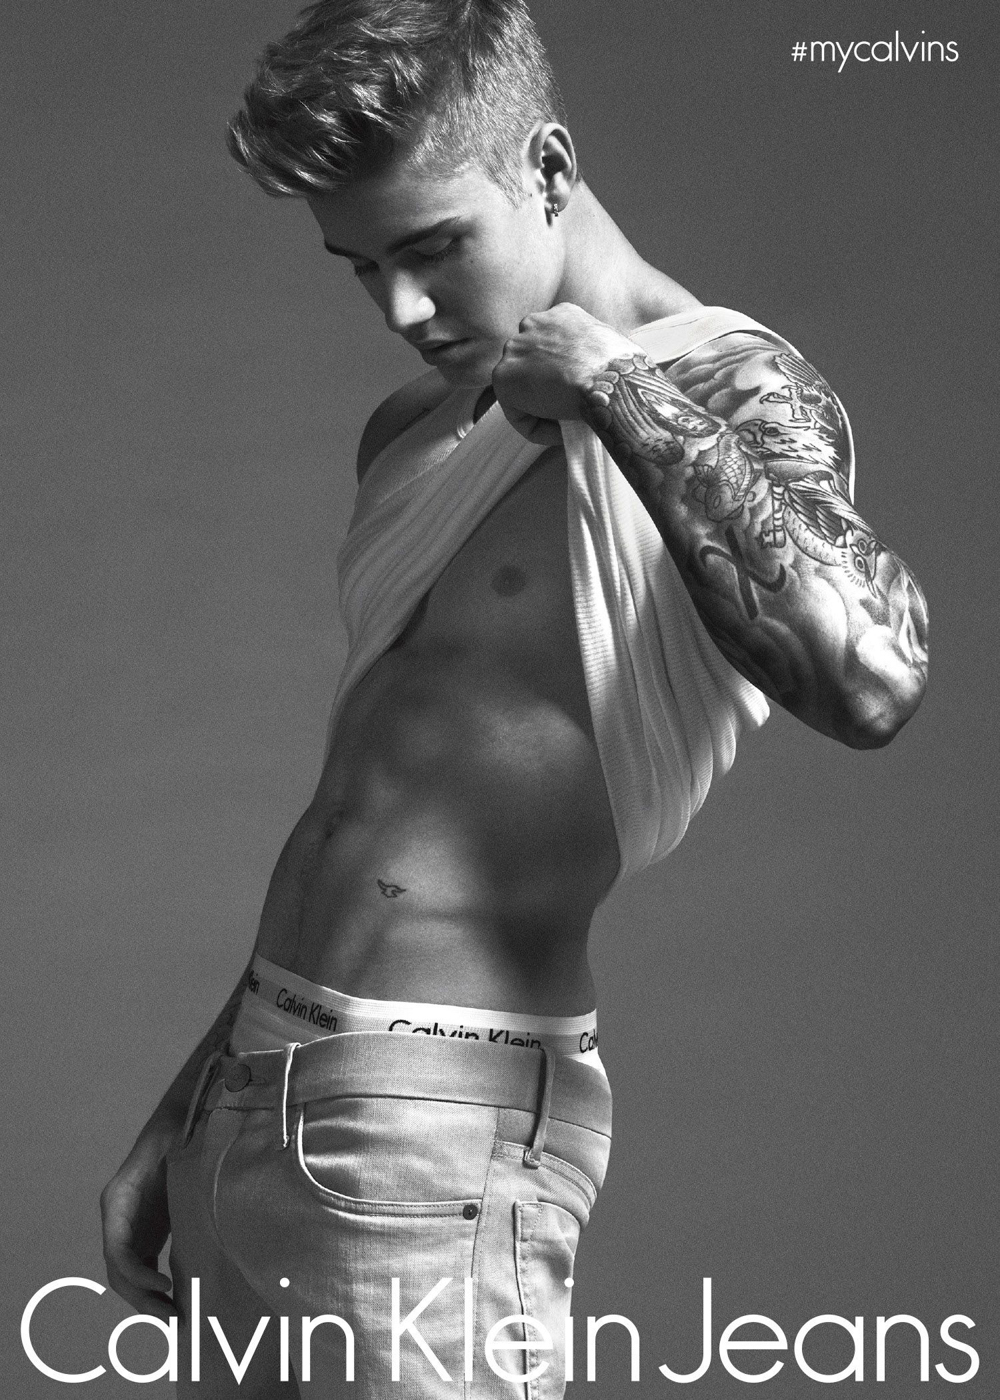 PHOTOS] Sexiest Calvin Klein Ads — See The Raciest Shots Of All